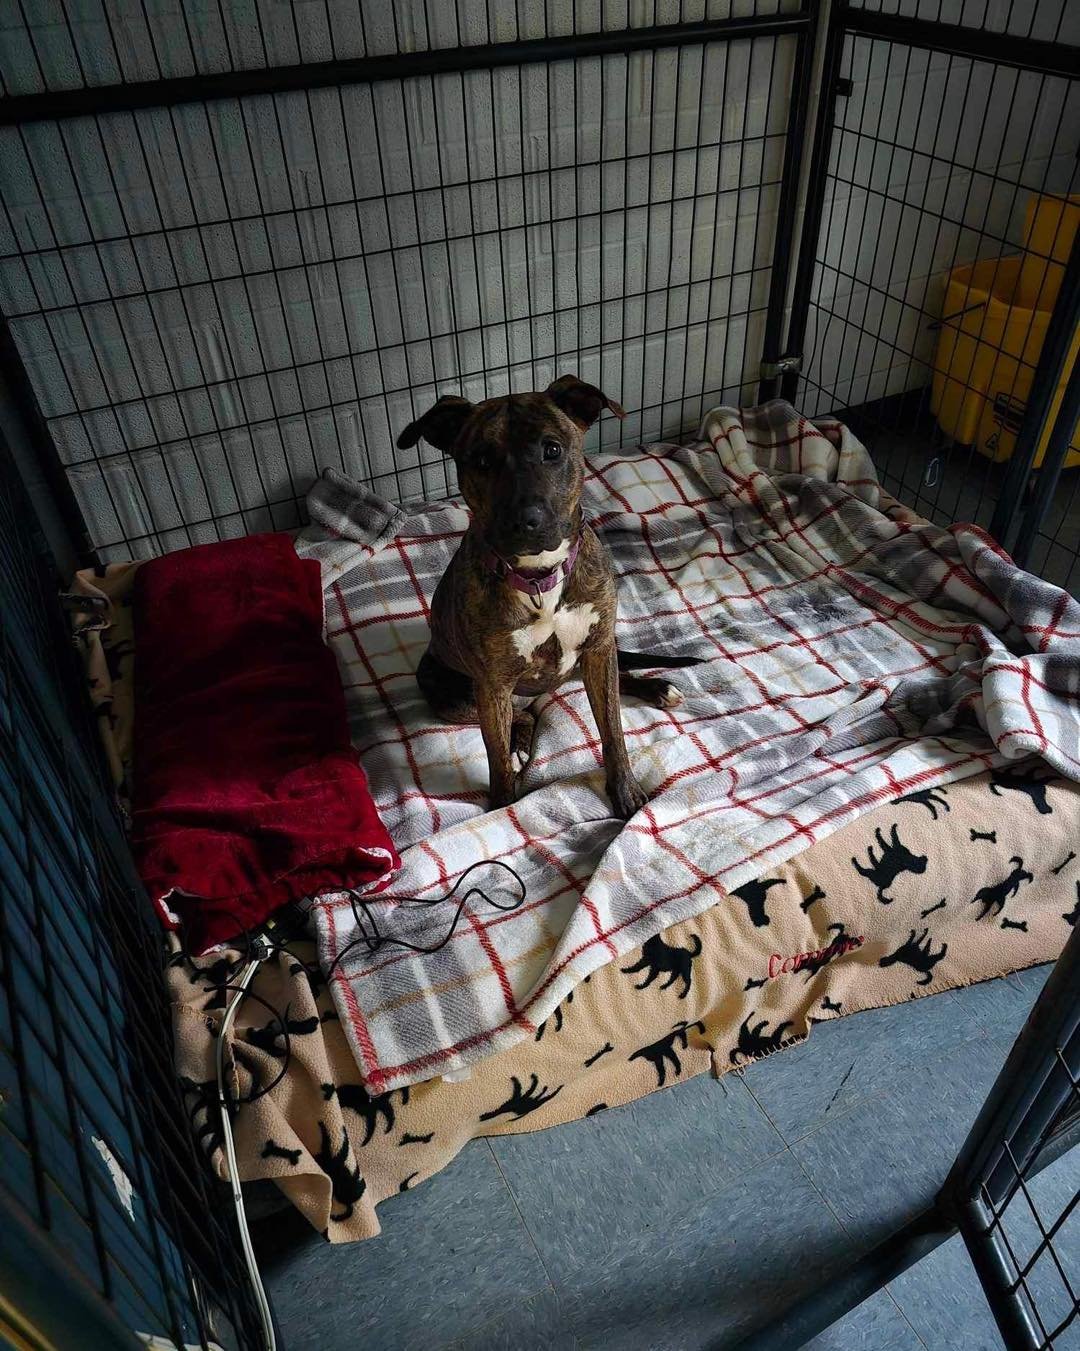 In an effort to prepare for the severe storm warnings and flooding of the area, our team members Kirstyn Wheeler and Kimberley Taylor volunteered to stay the night at our kennel facility. After tucking our adoptable dogs into bed for the evening, Lad